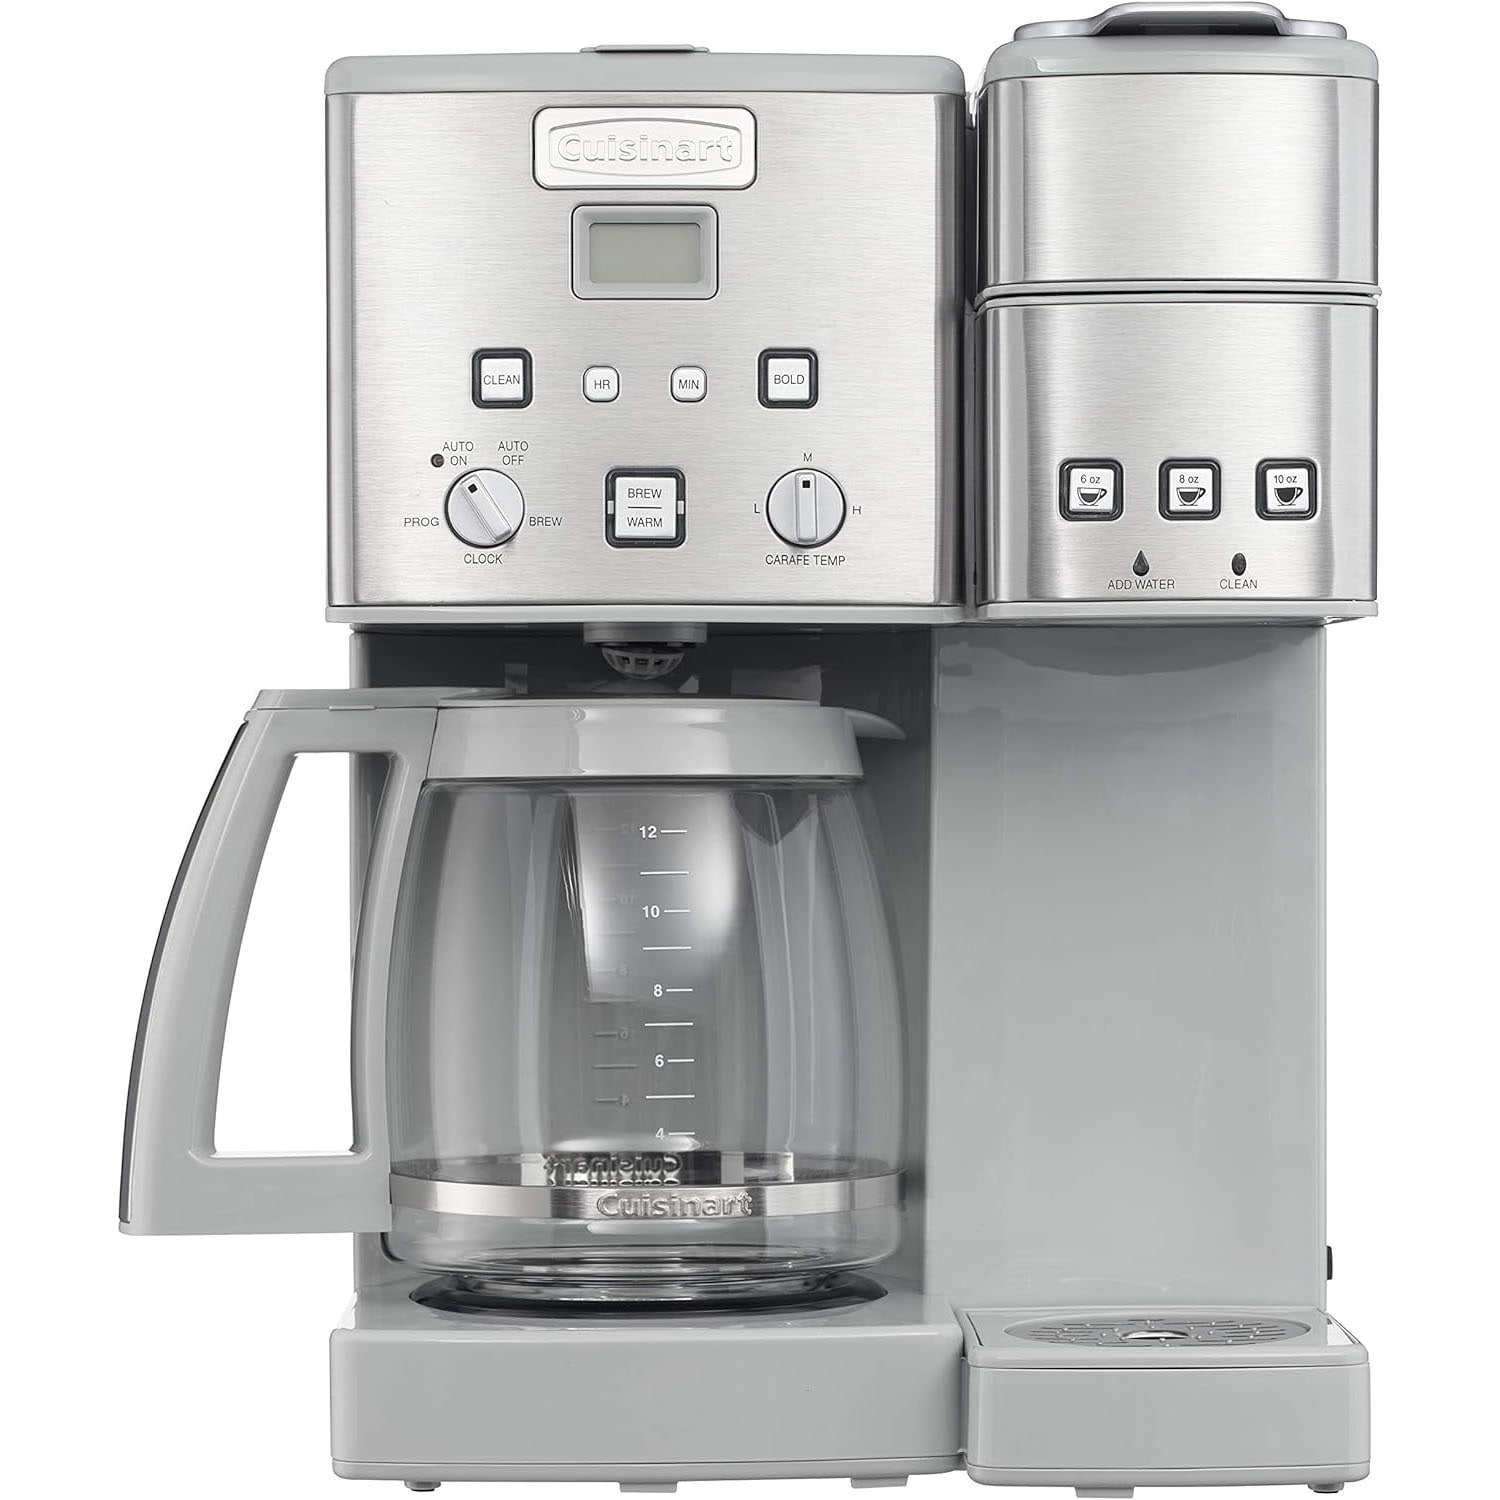 https://ak1.ostkcdn.com/images/products/is/images/direct/3ad6ebefd7b746839ae07234a5b8783a94a3a952/Cuisinart-Coffee-Center-12-Cup-Coffeemaker-and-Single-Serve-Brewer.jpg